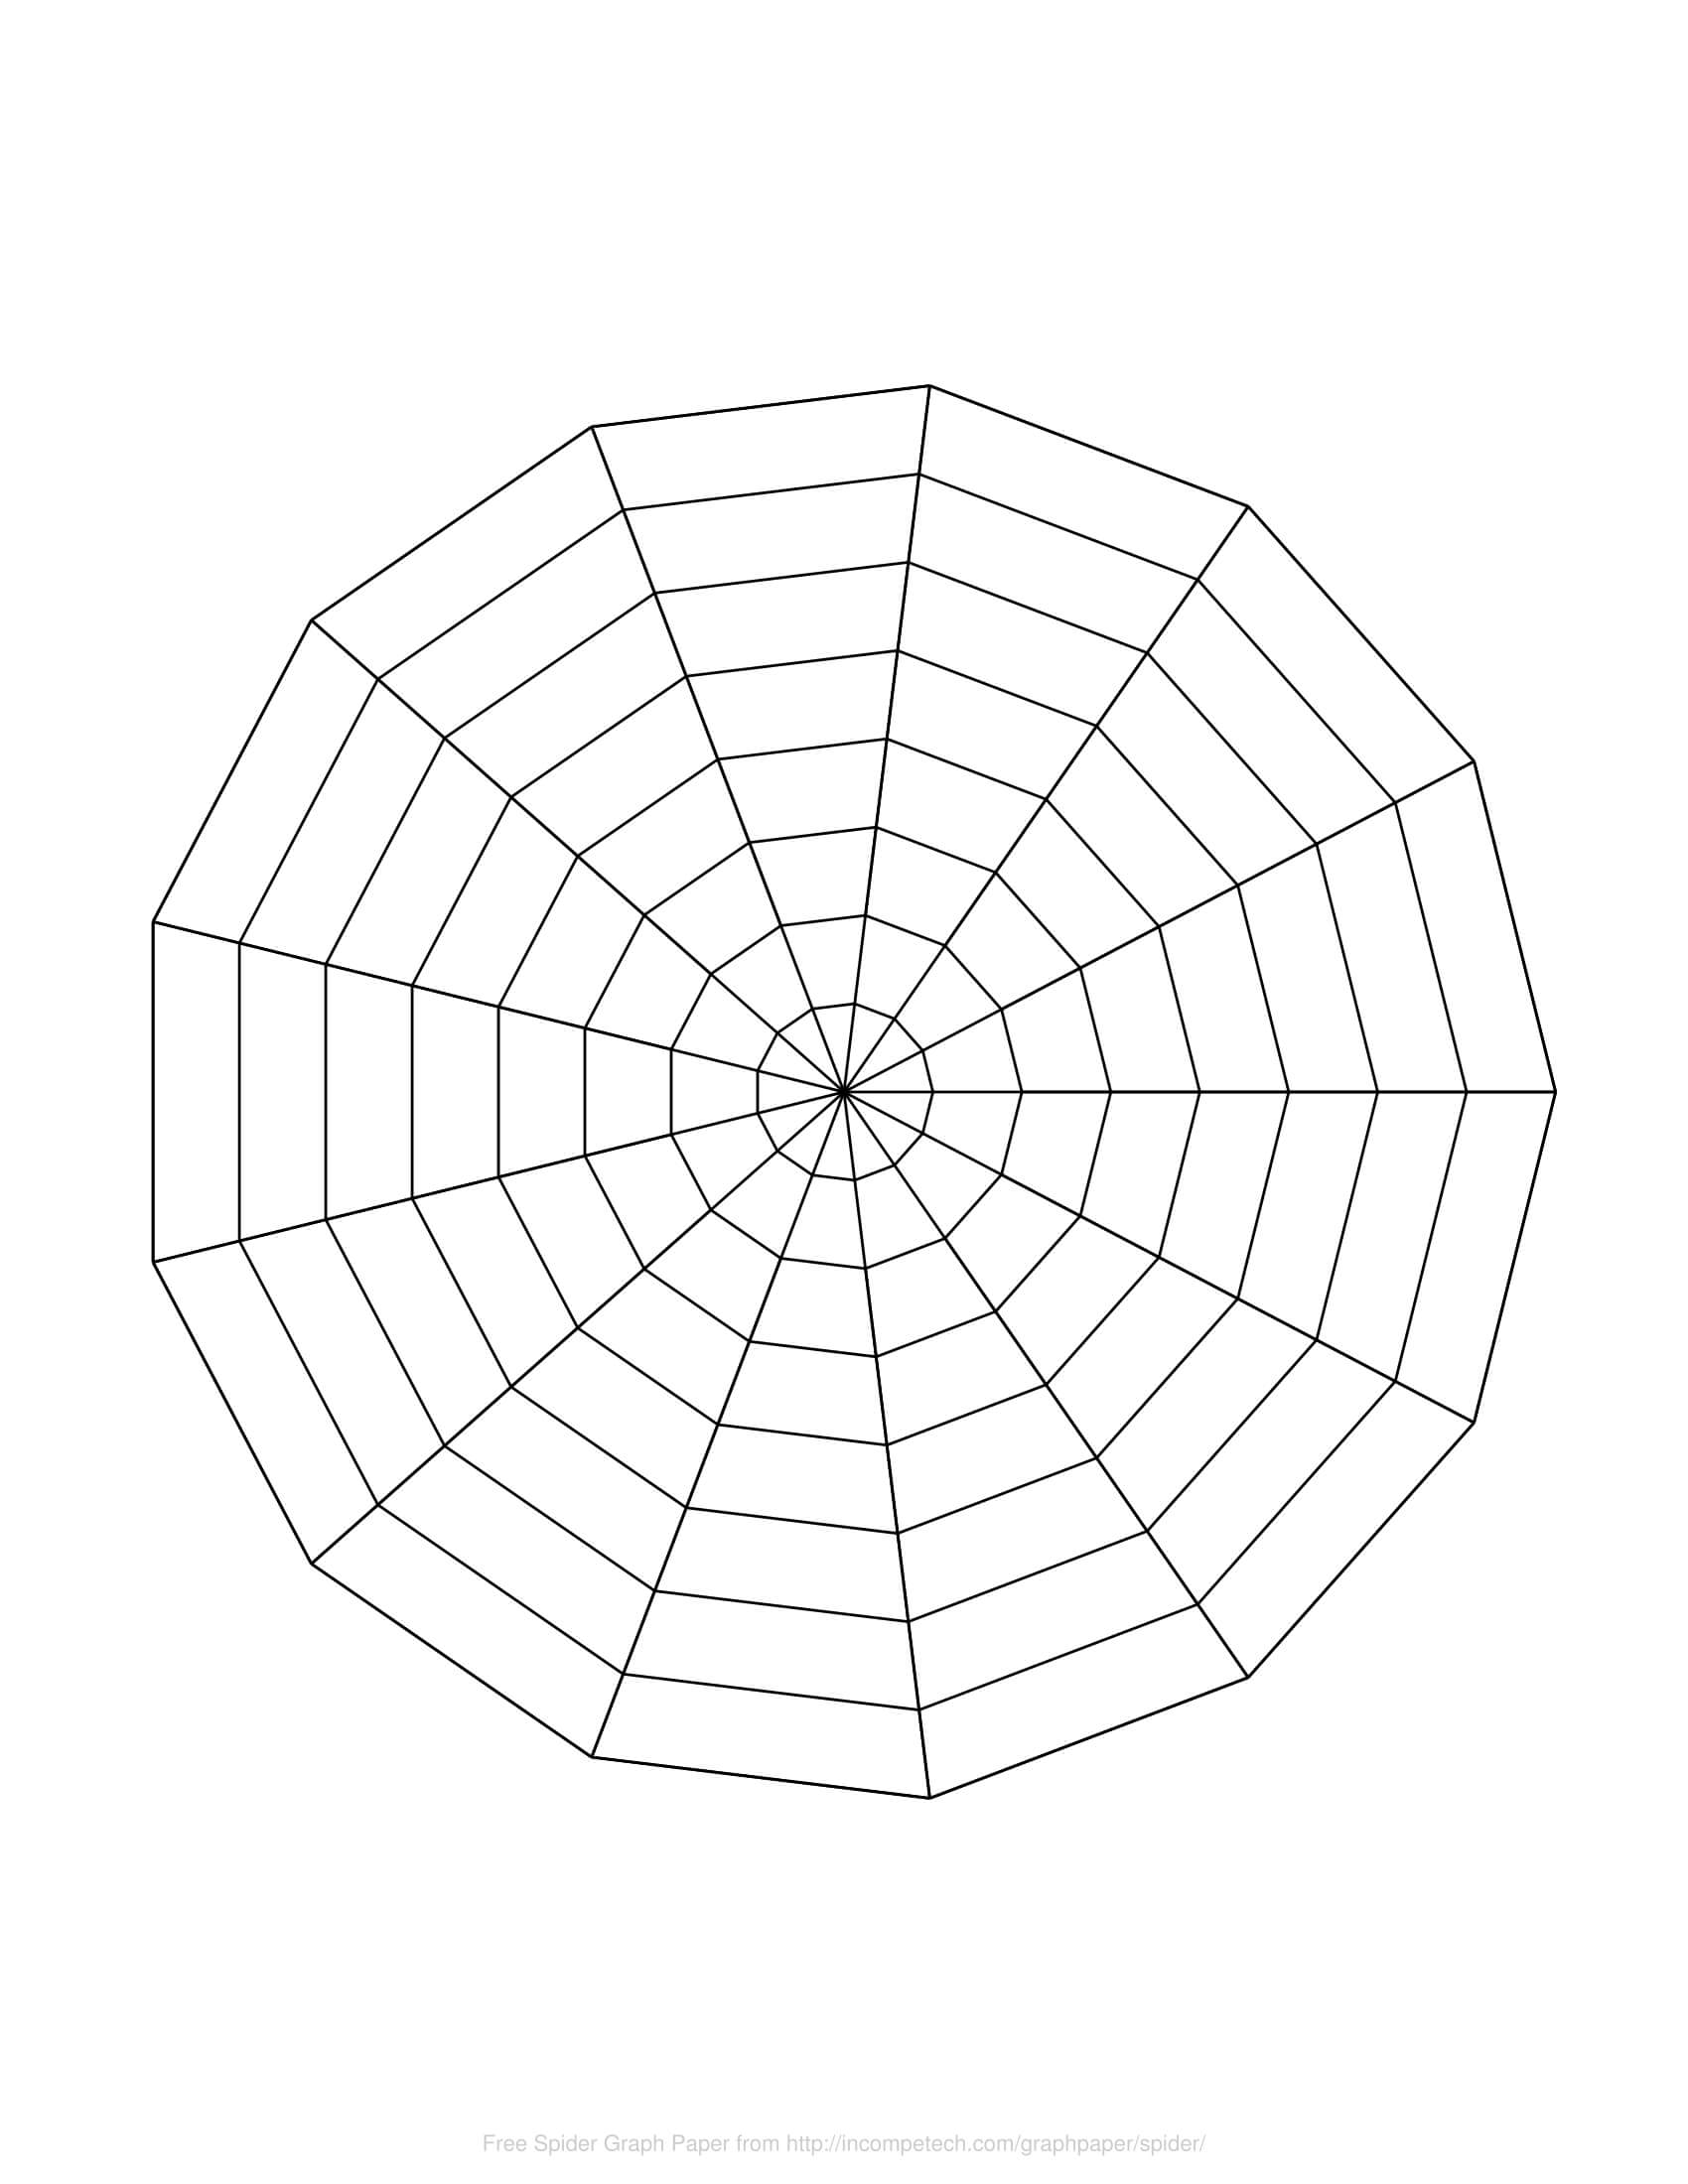 Spider Web Diagram Blank – User Guide Of Wiring Diagram Within Blank Radar Chart Template